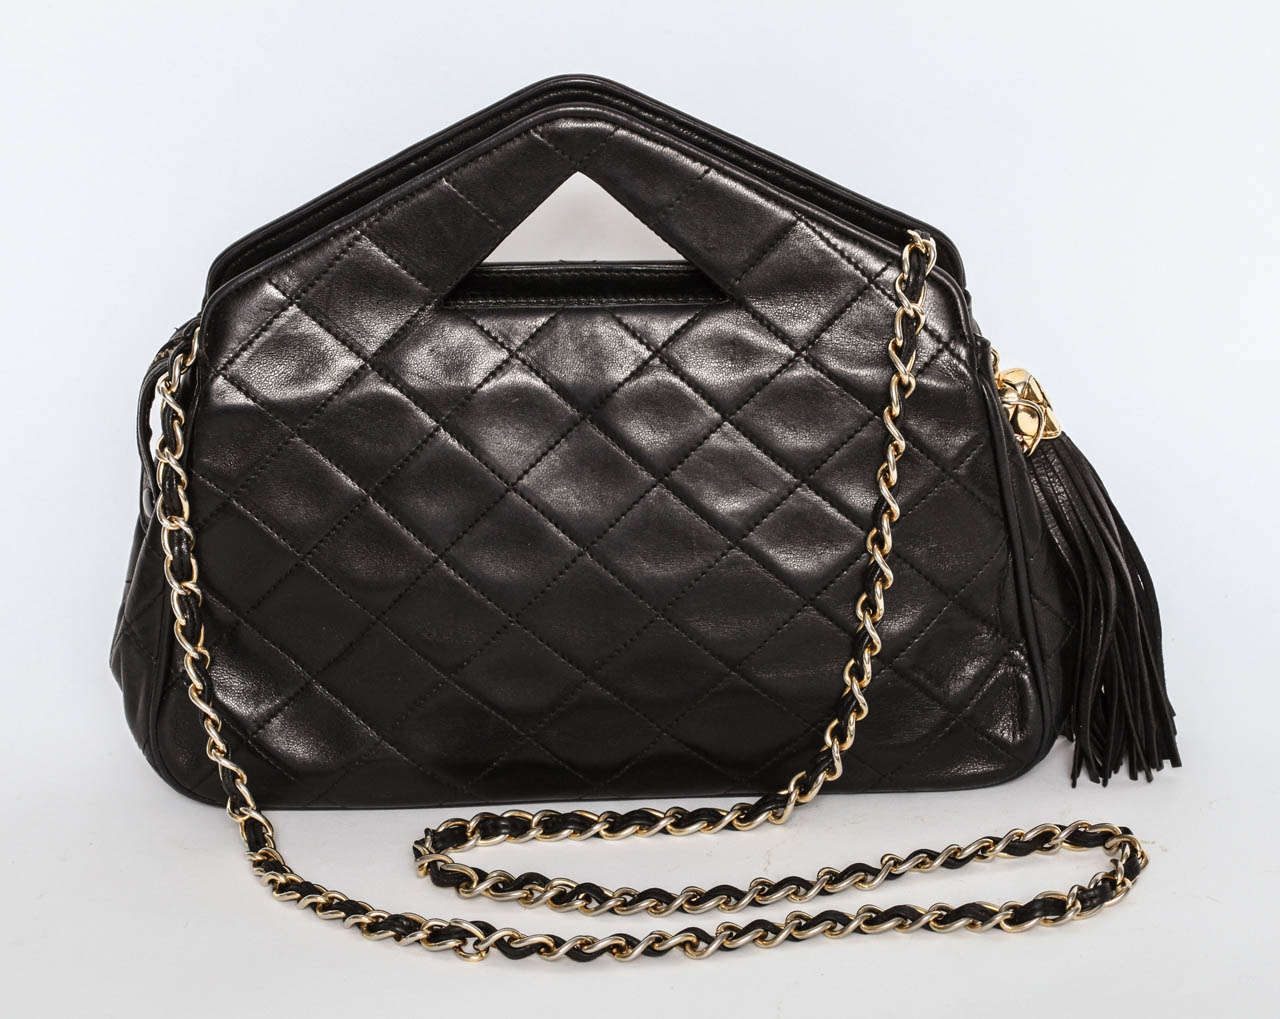 A fabulous black quilted Chanel bag with tassle and pyramid shaped handles.